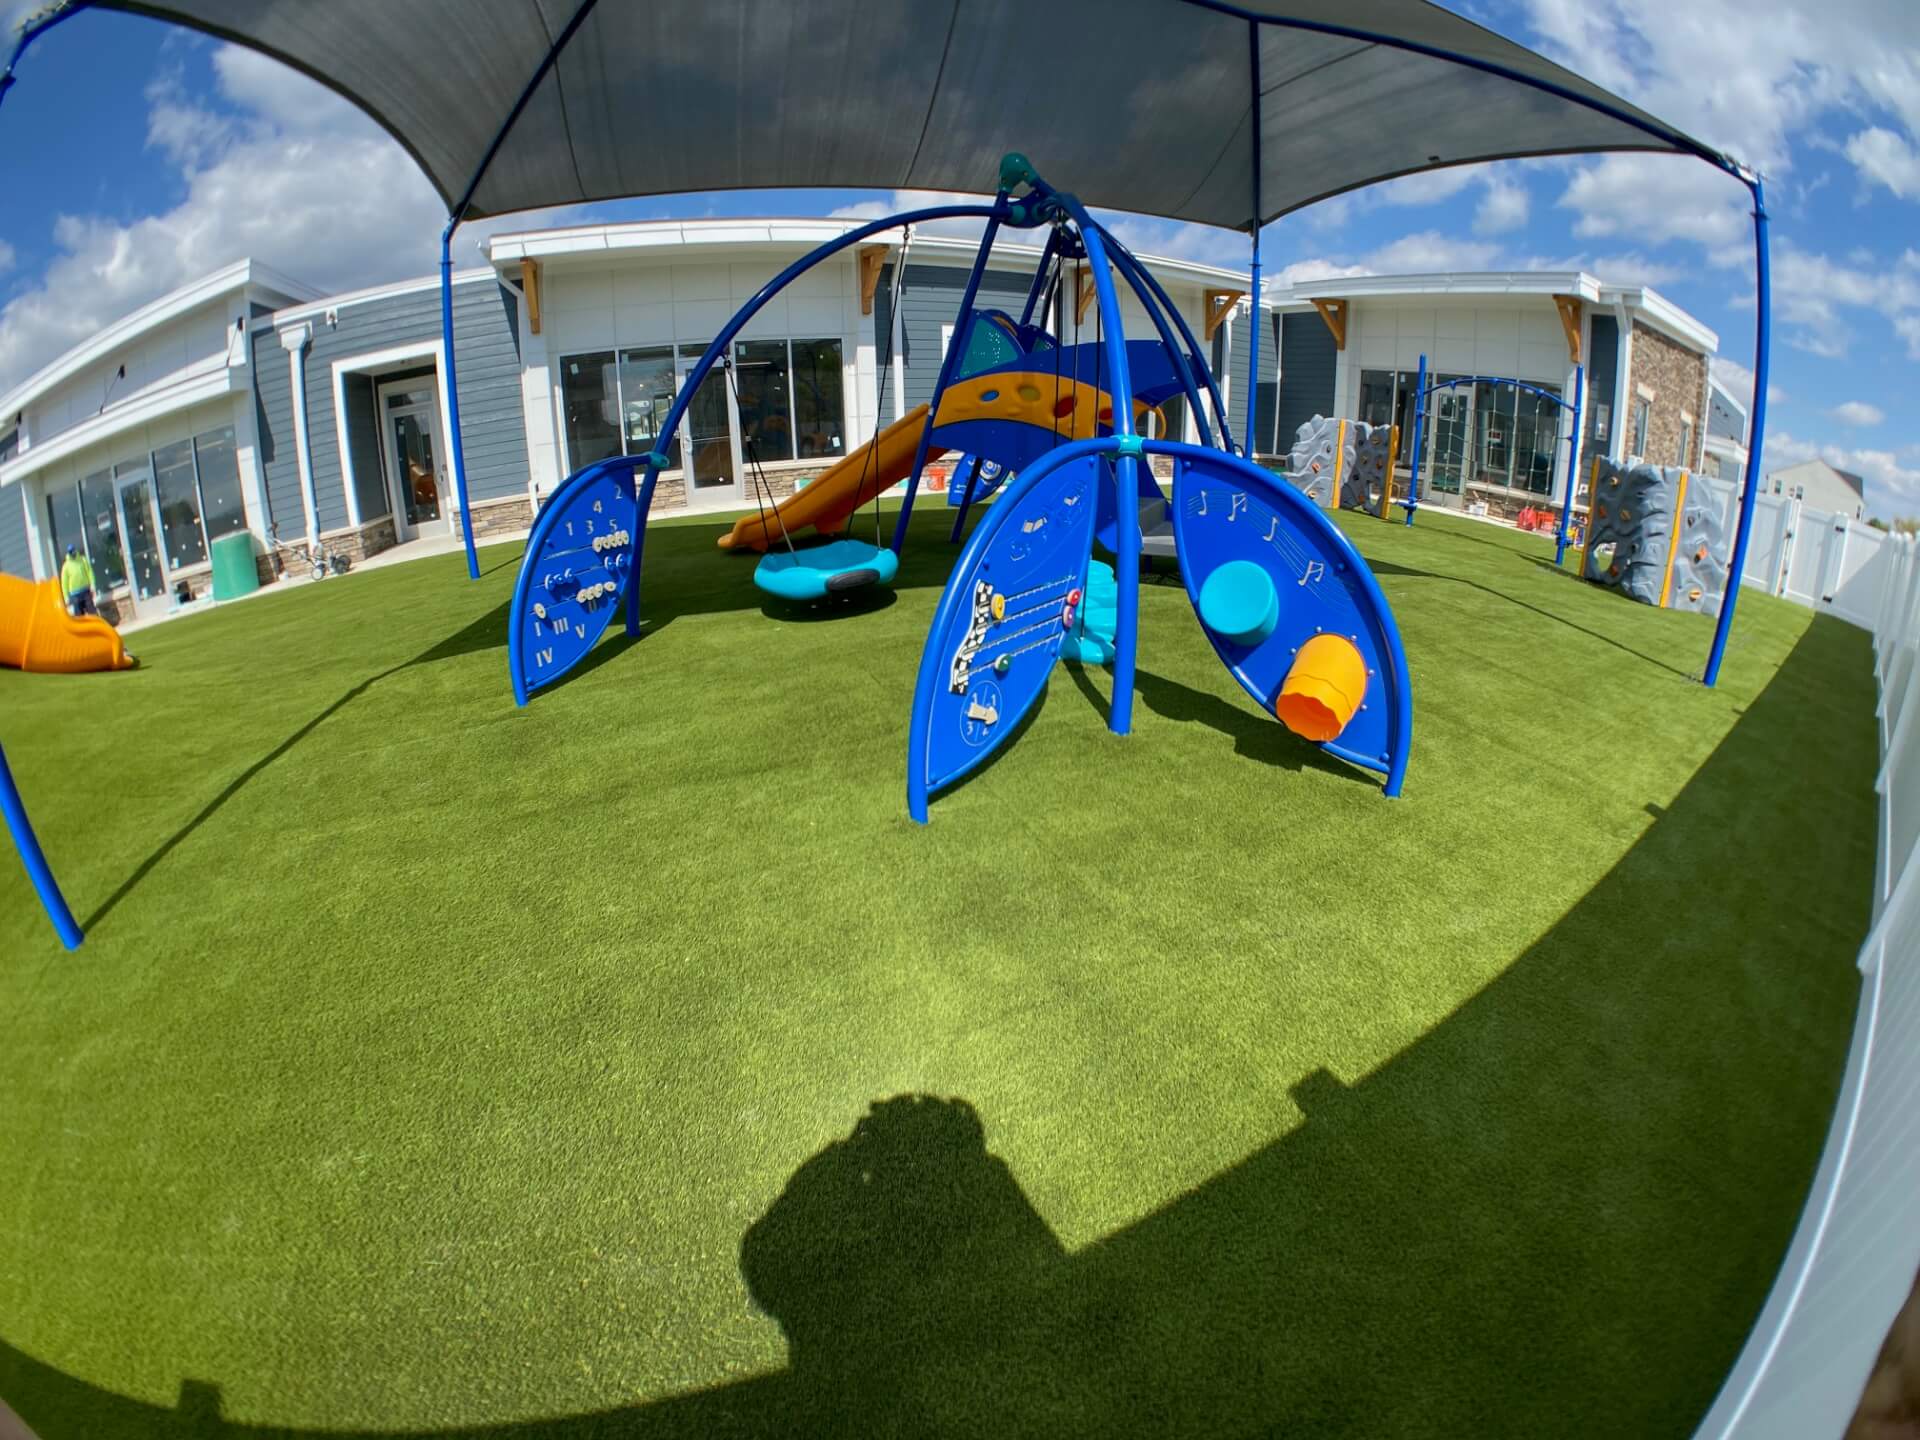 Artificial playground turf installed in a chesapeake bay daycare